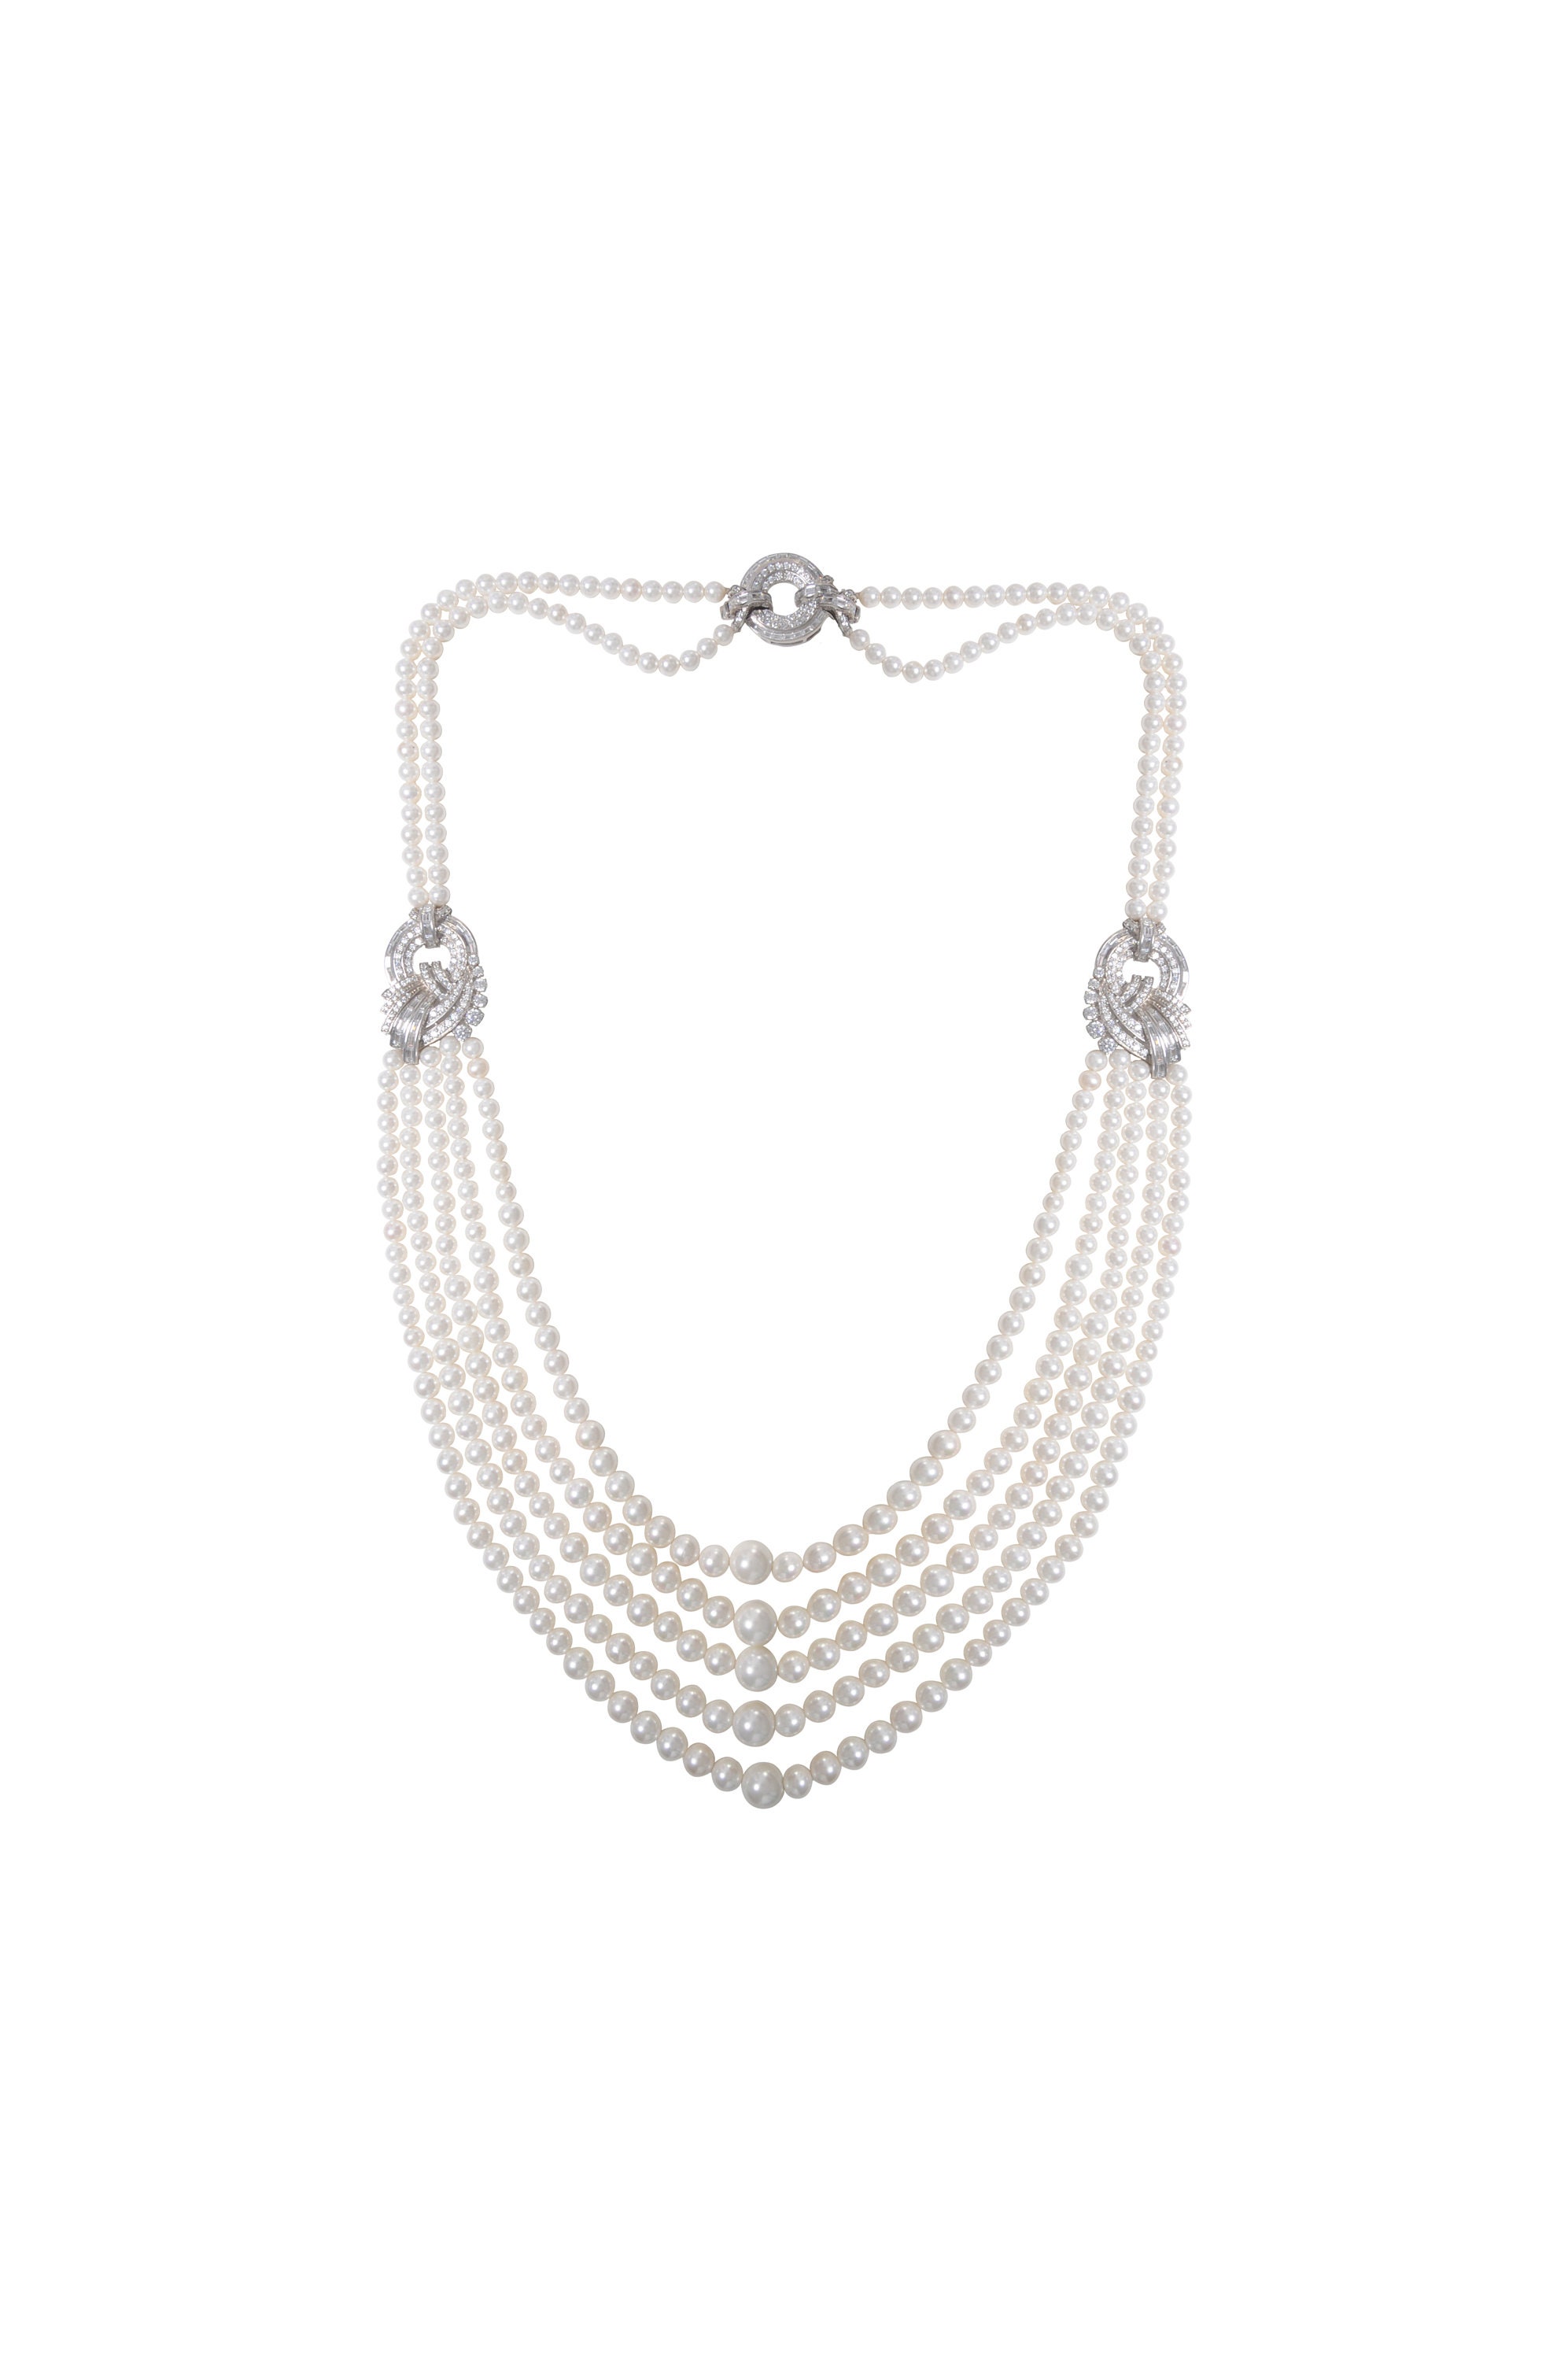 Discover fabulous new Chanel pearl collection of high jewellery